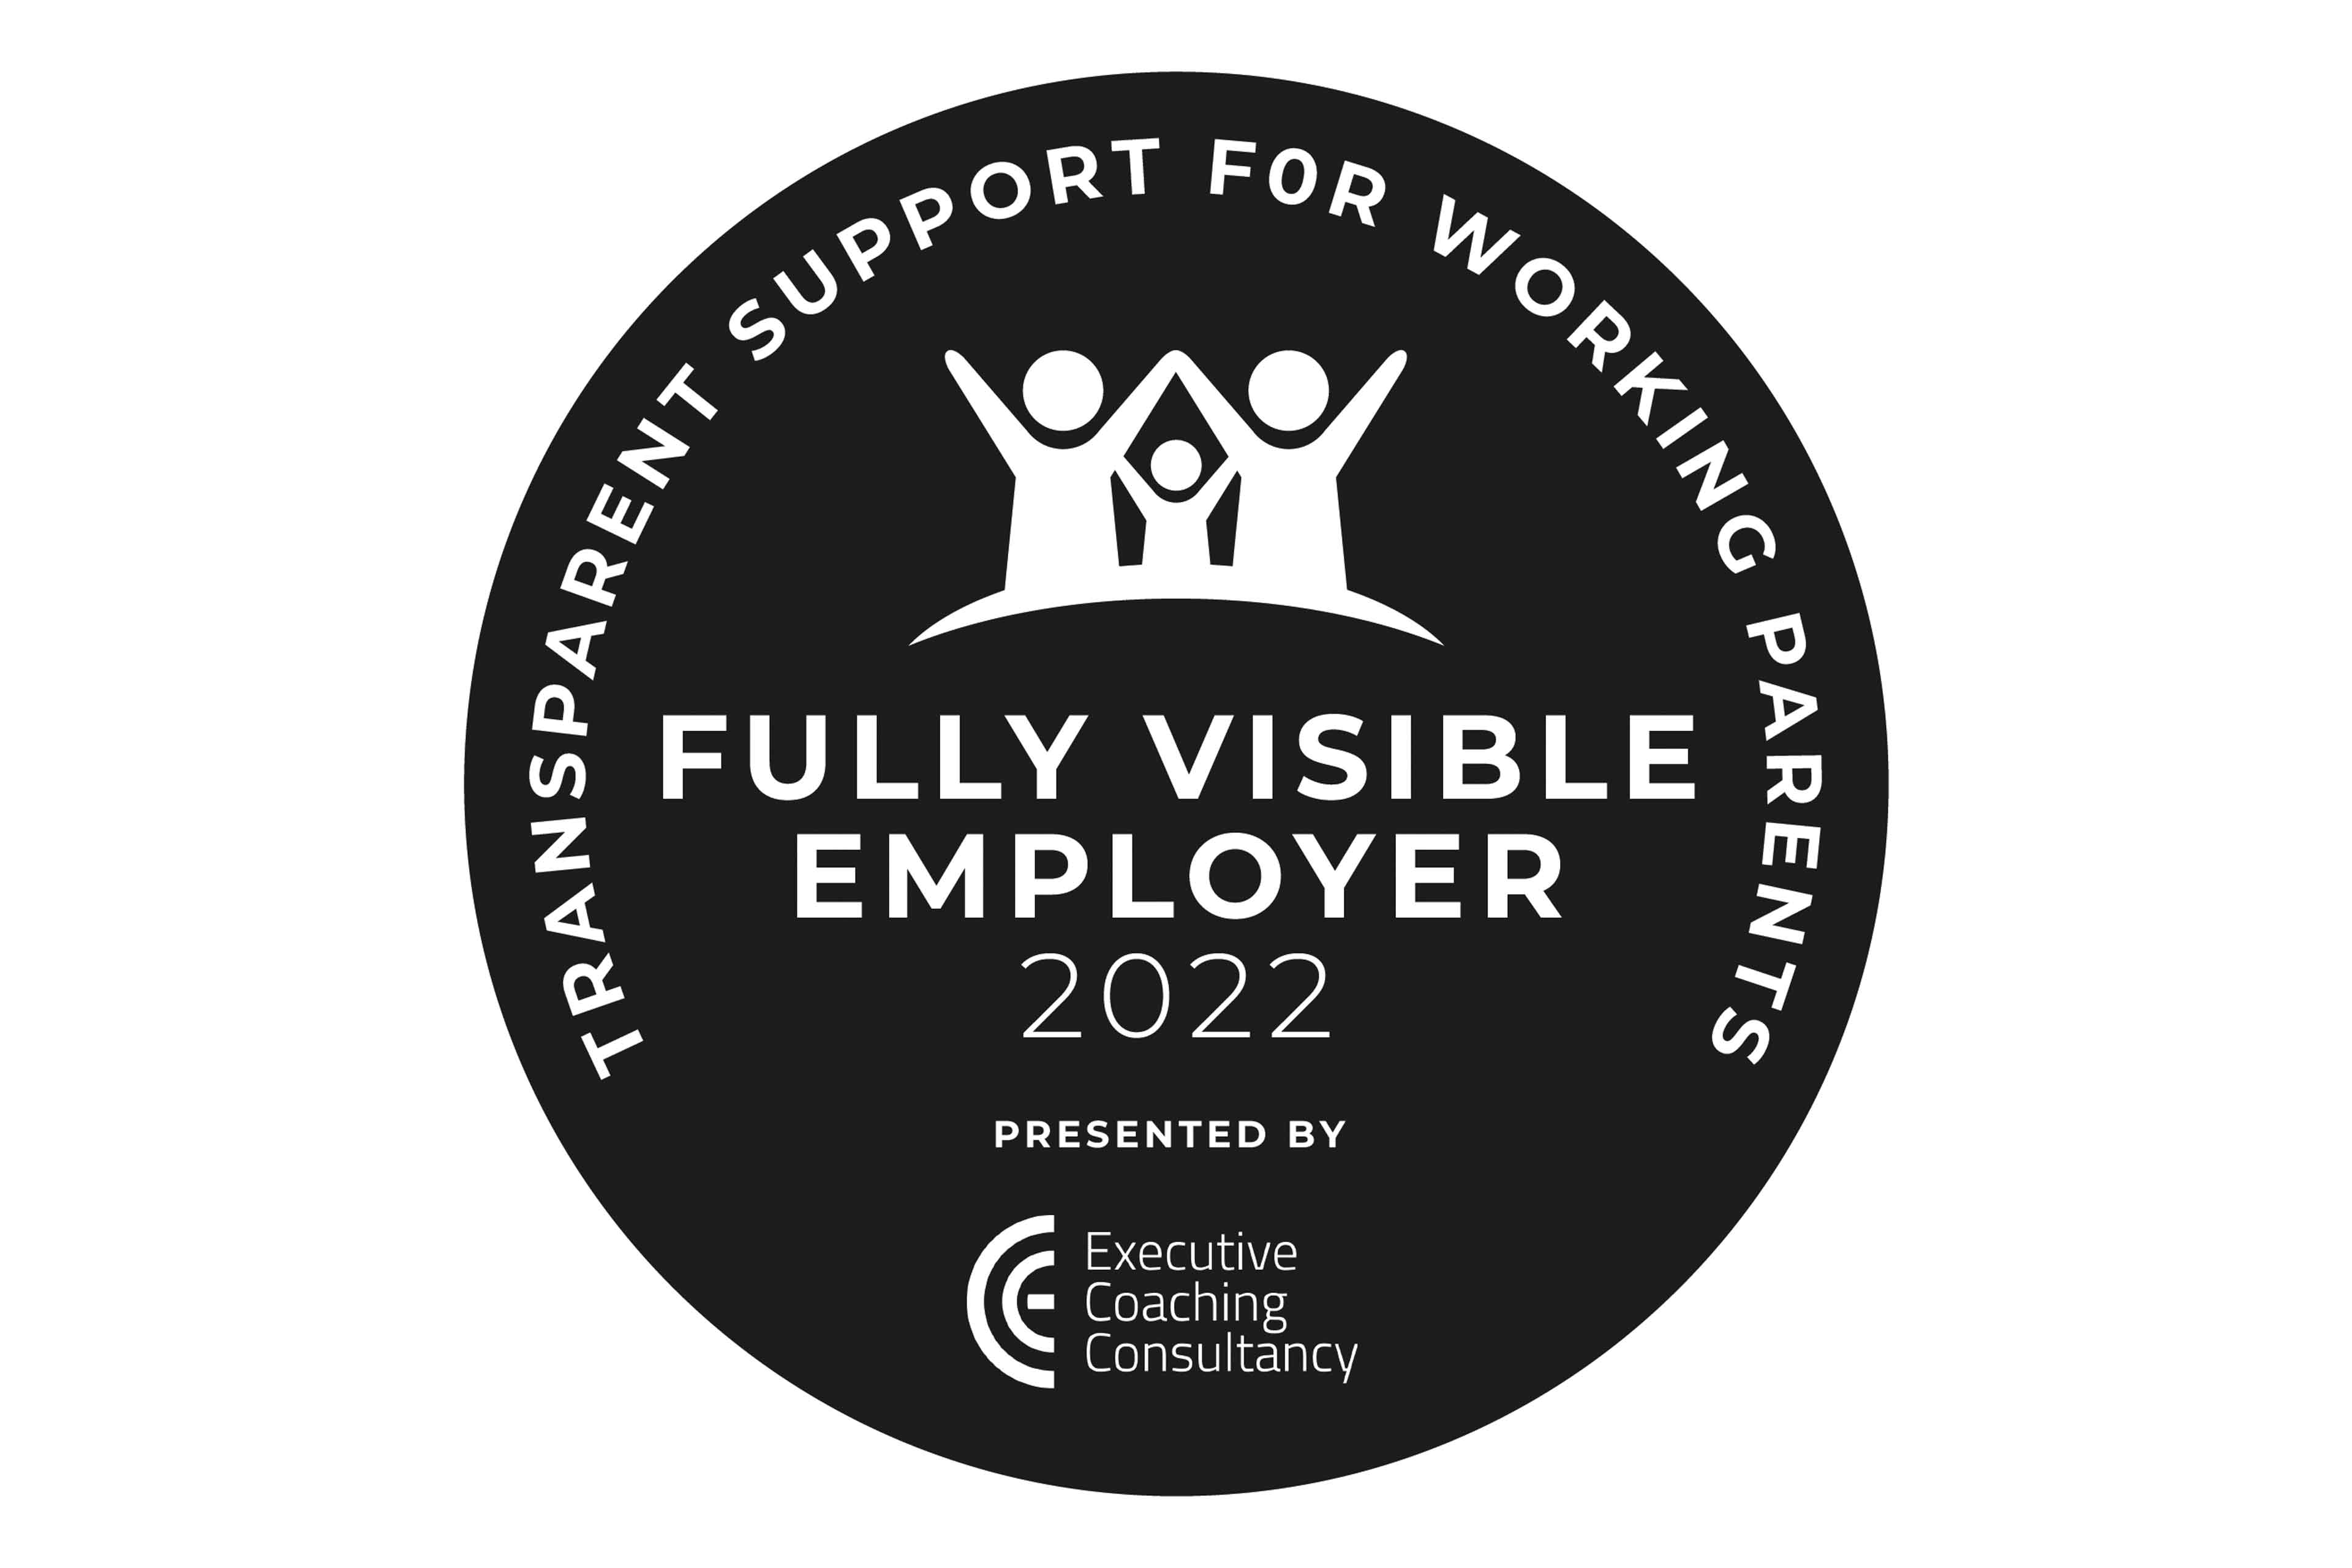 Fully visible employer badge